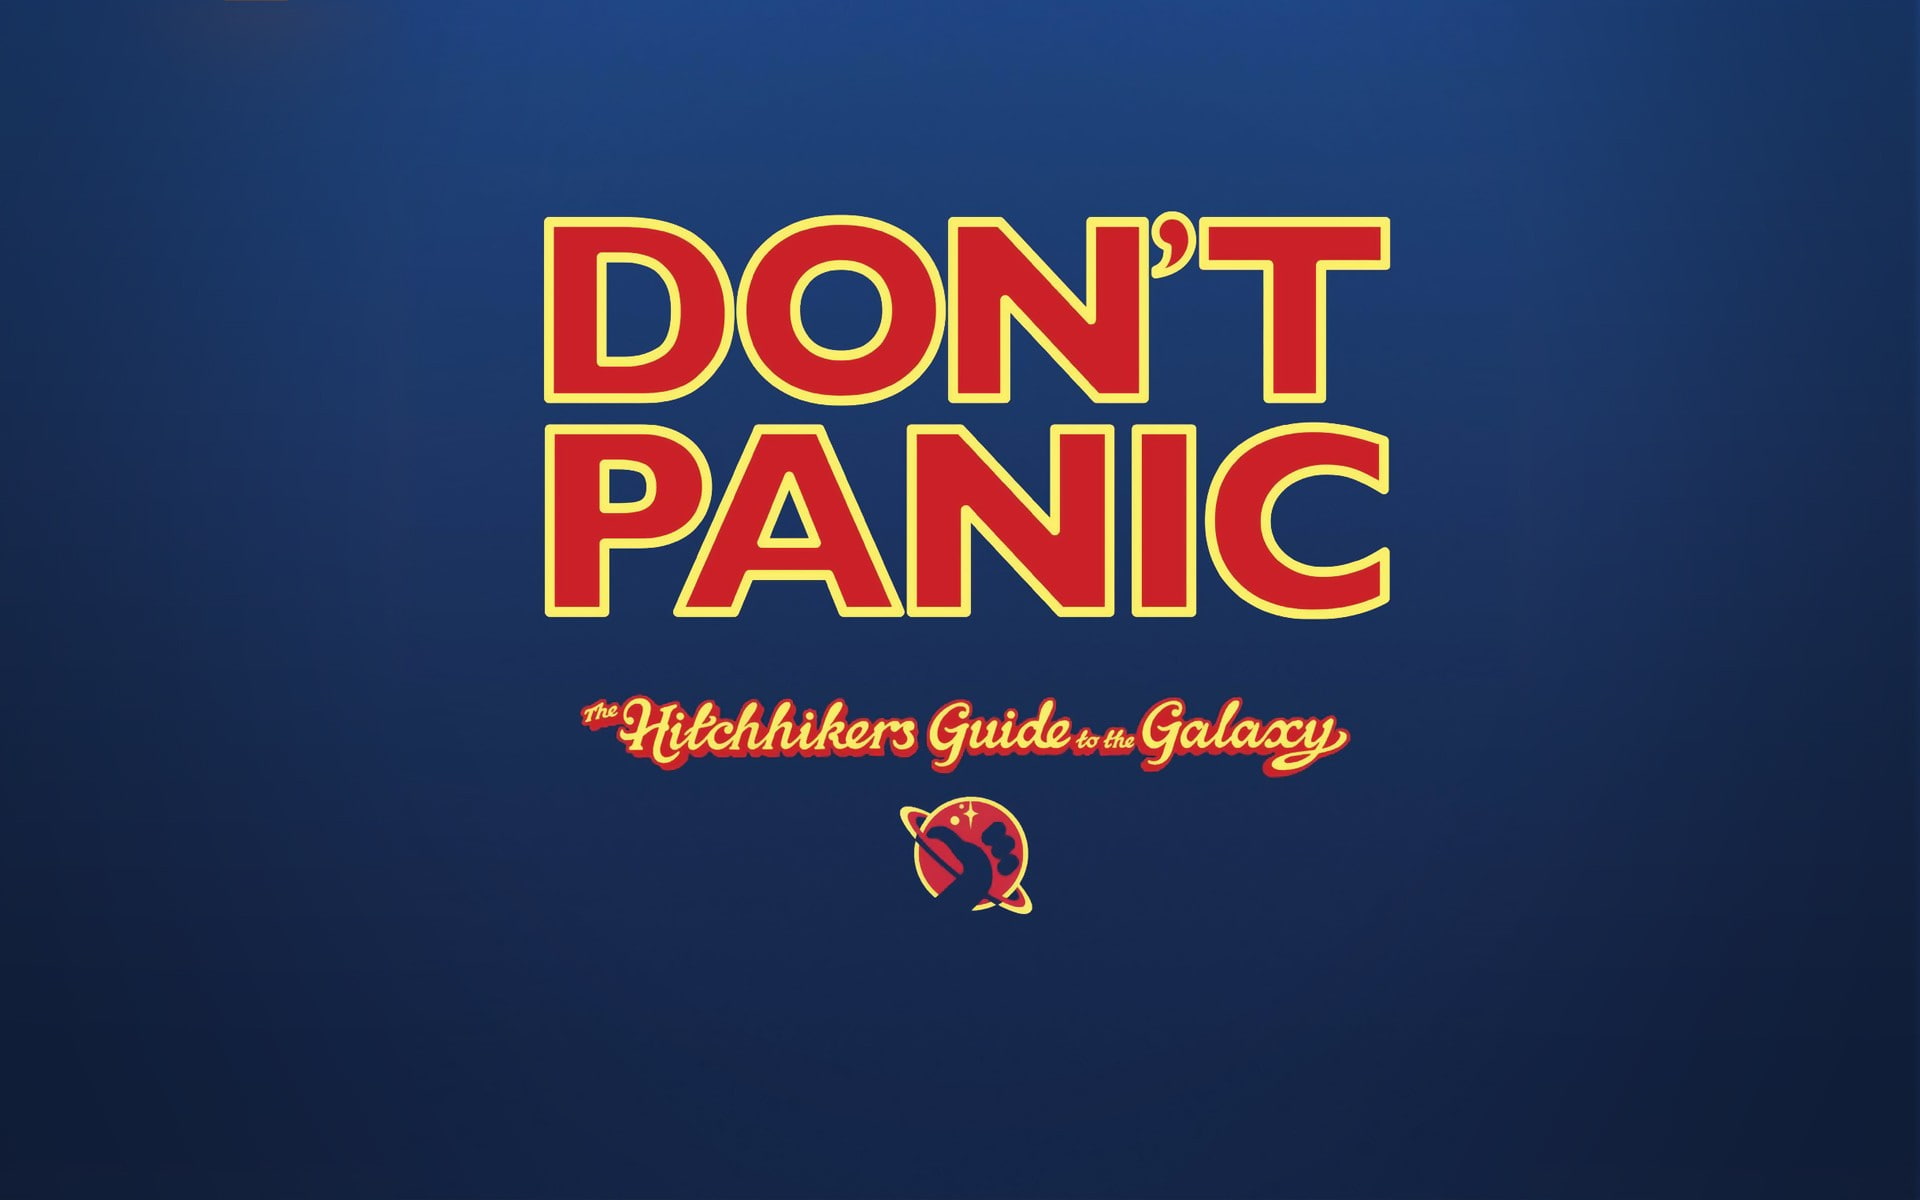 minimalism  humor  The Hitchhikers Guide to the Galaxy  Dont Panic  typography